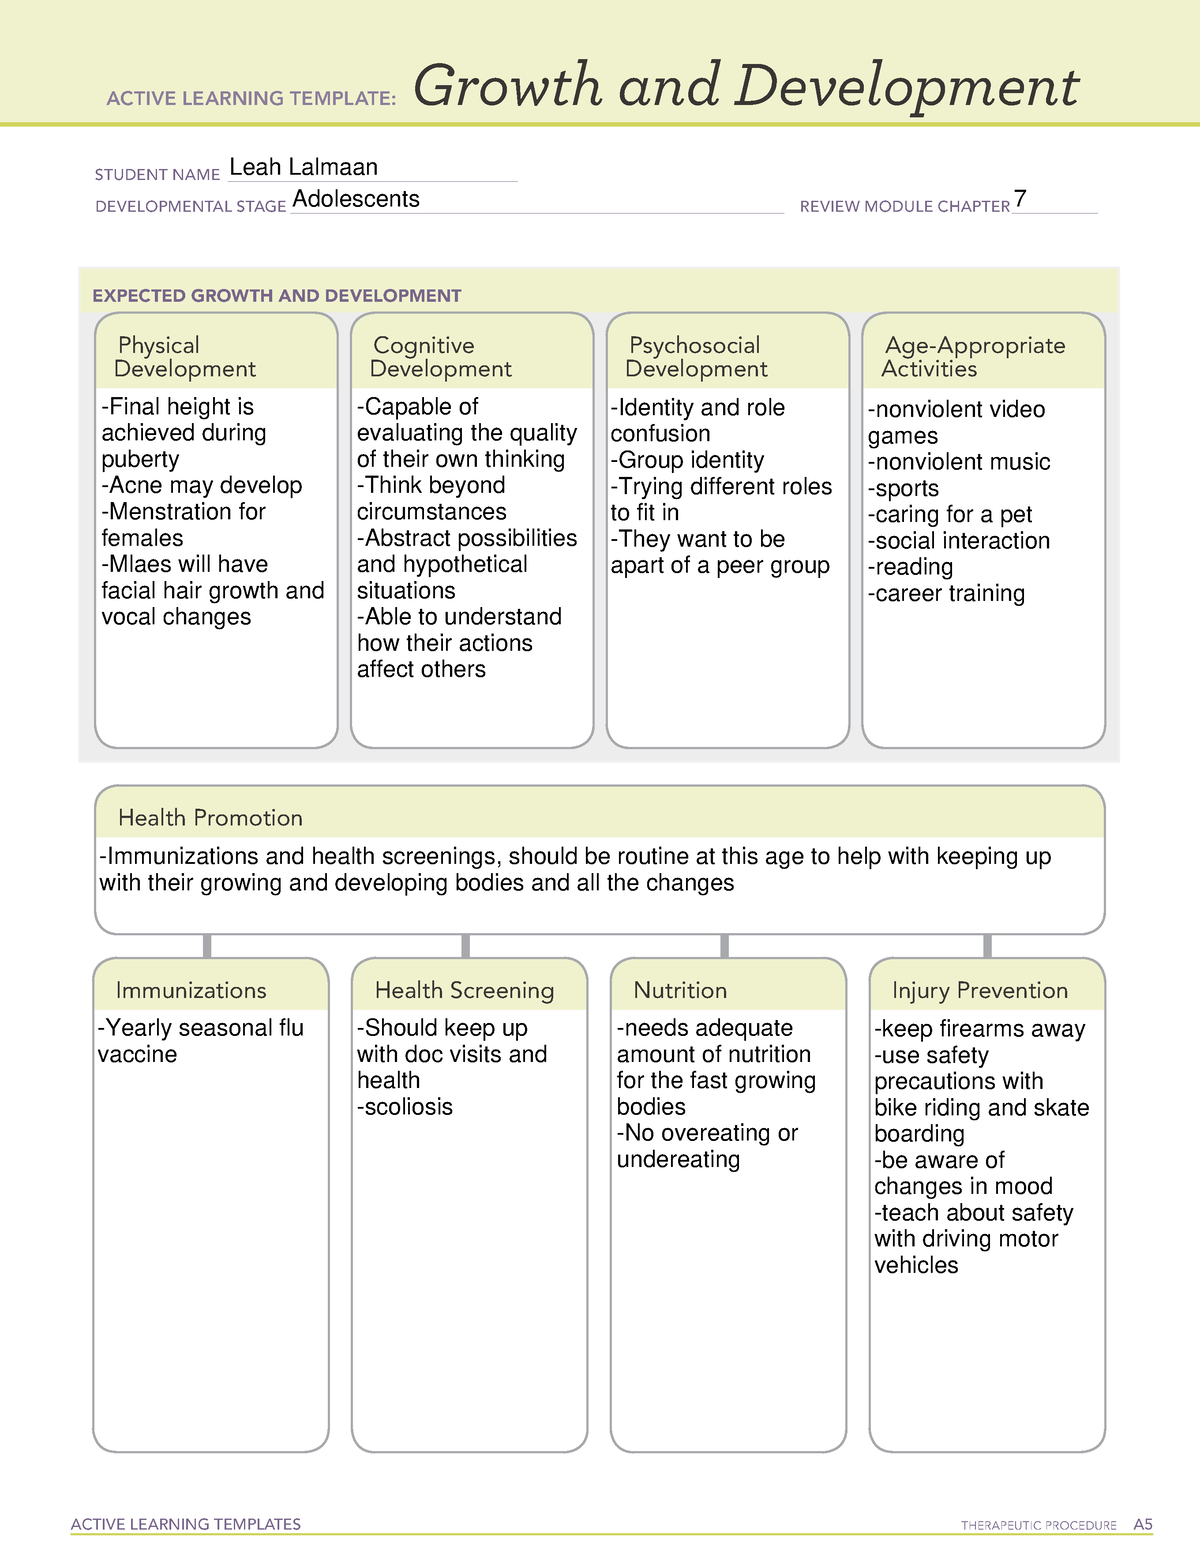 Adolescents Growth and Development ATI ACTIVE LEARNING TEMPLATES